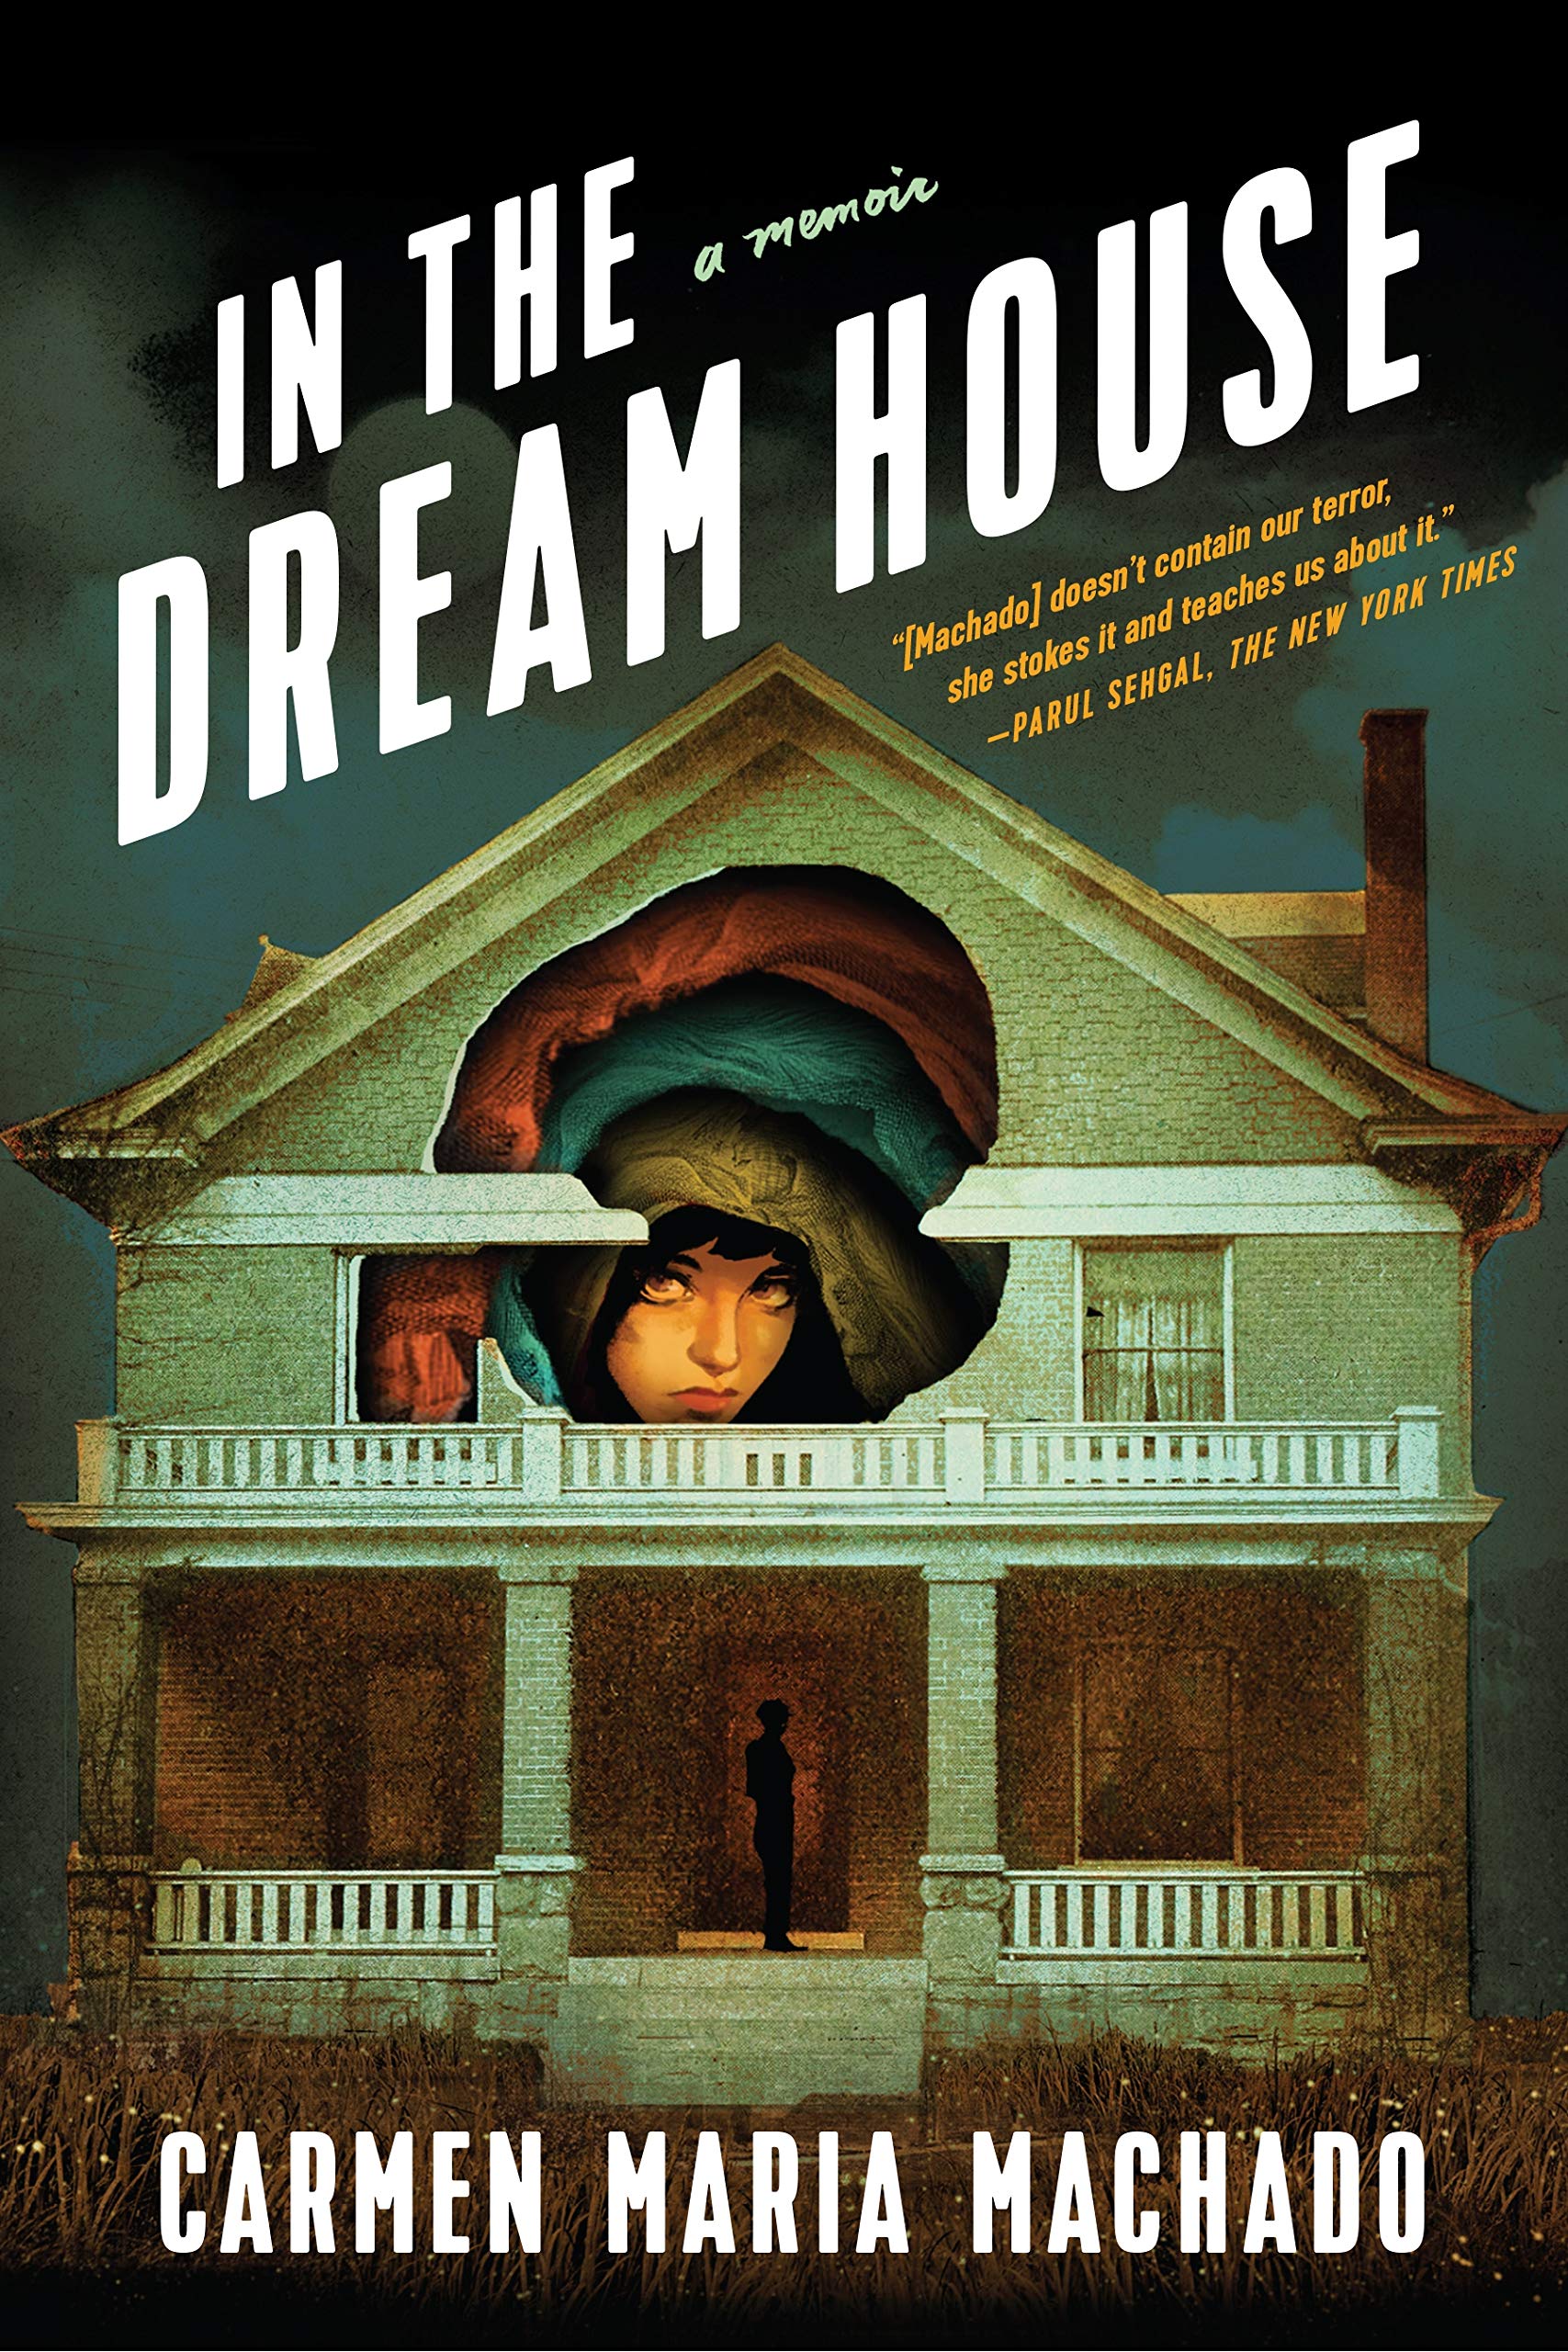 in the dream house book cover